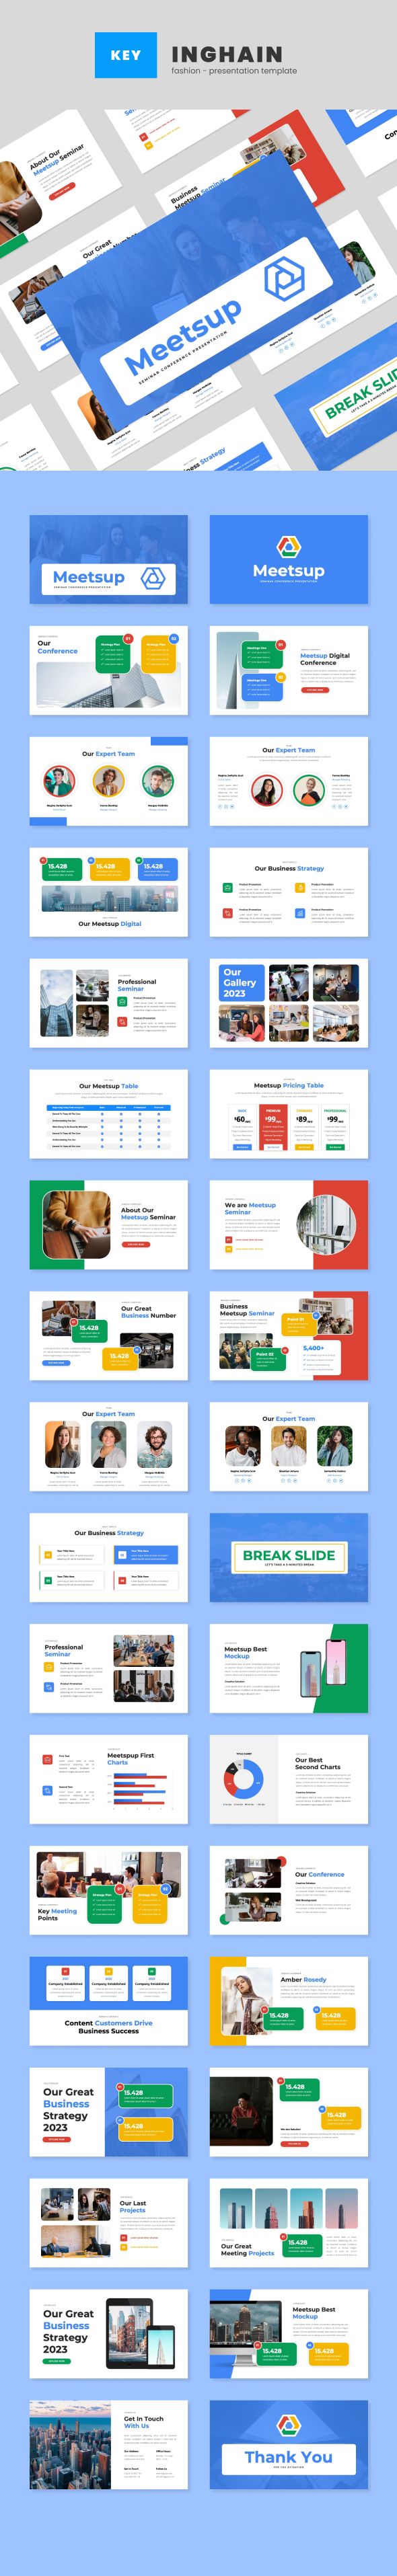 Meetsup - Conference Keynote Template